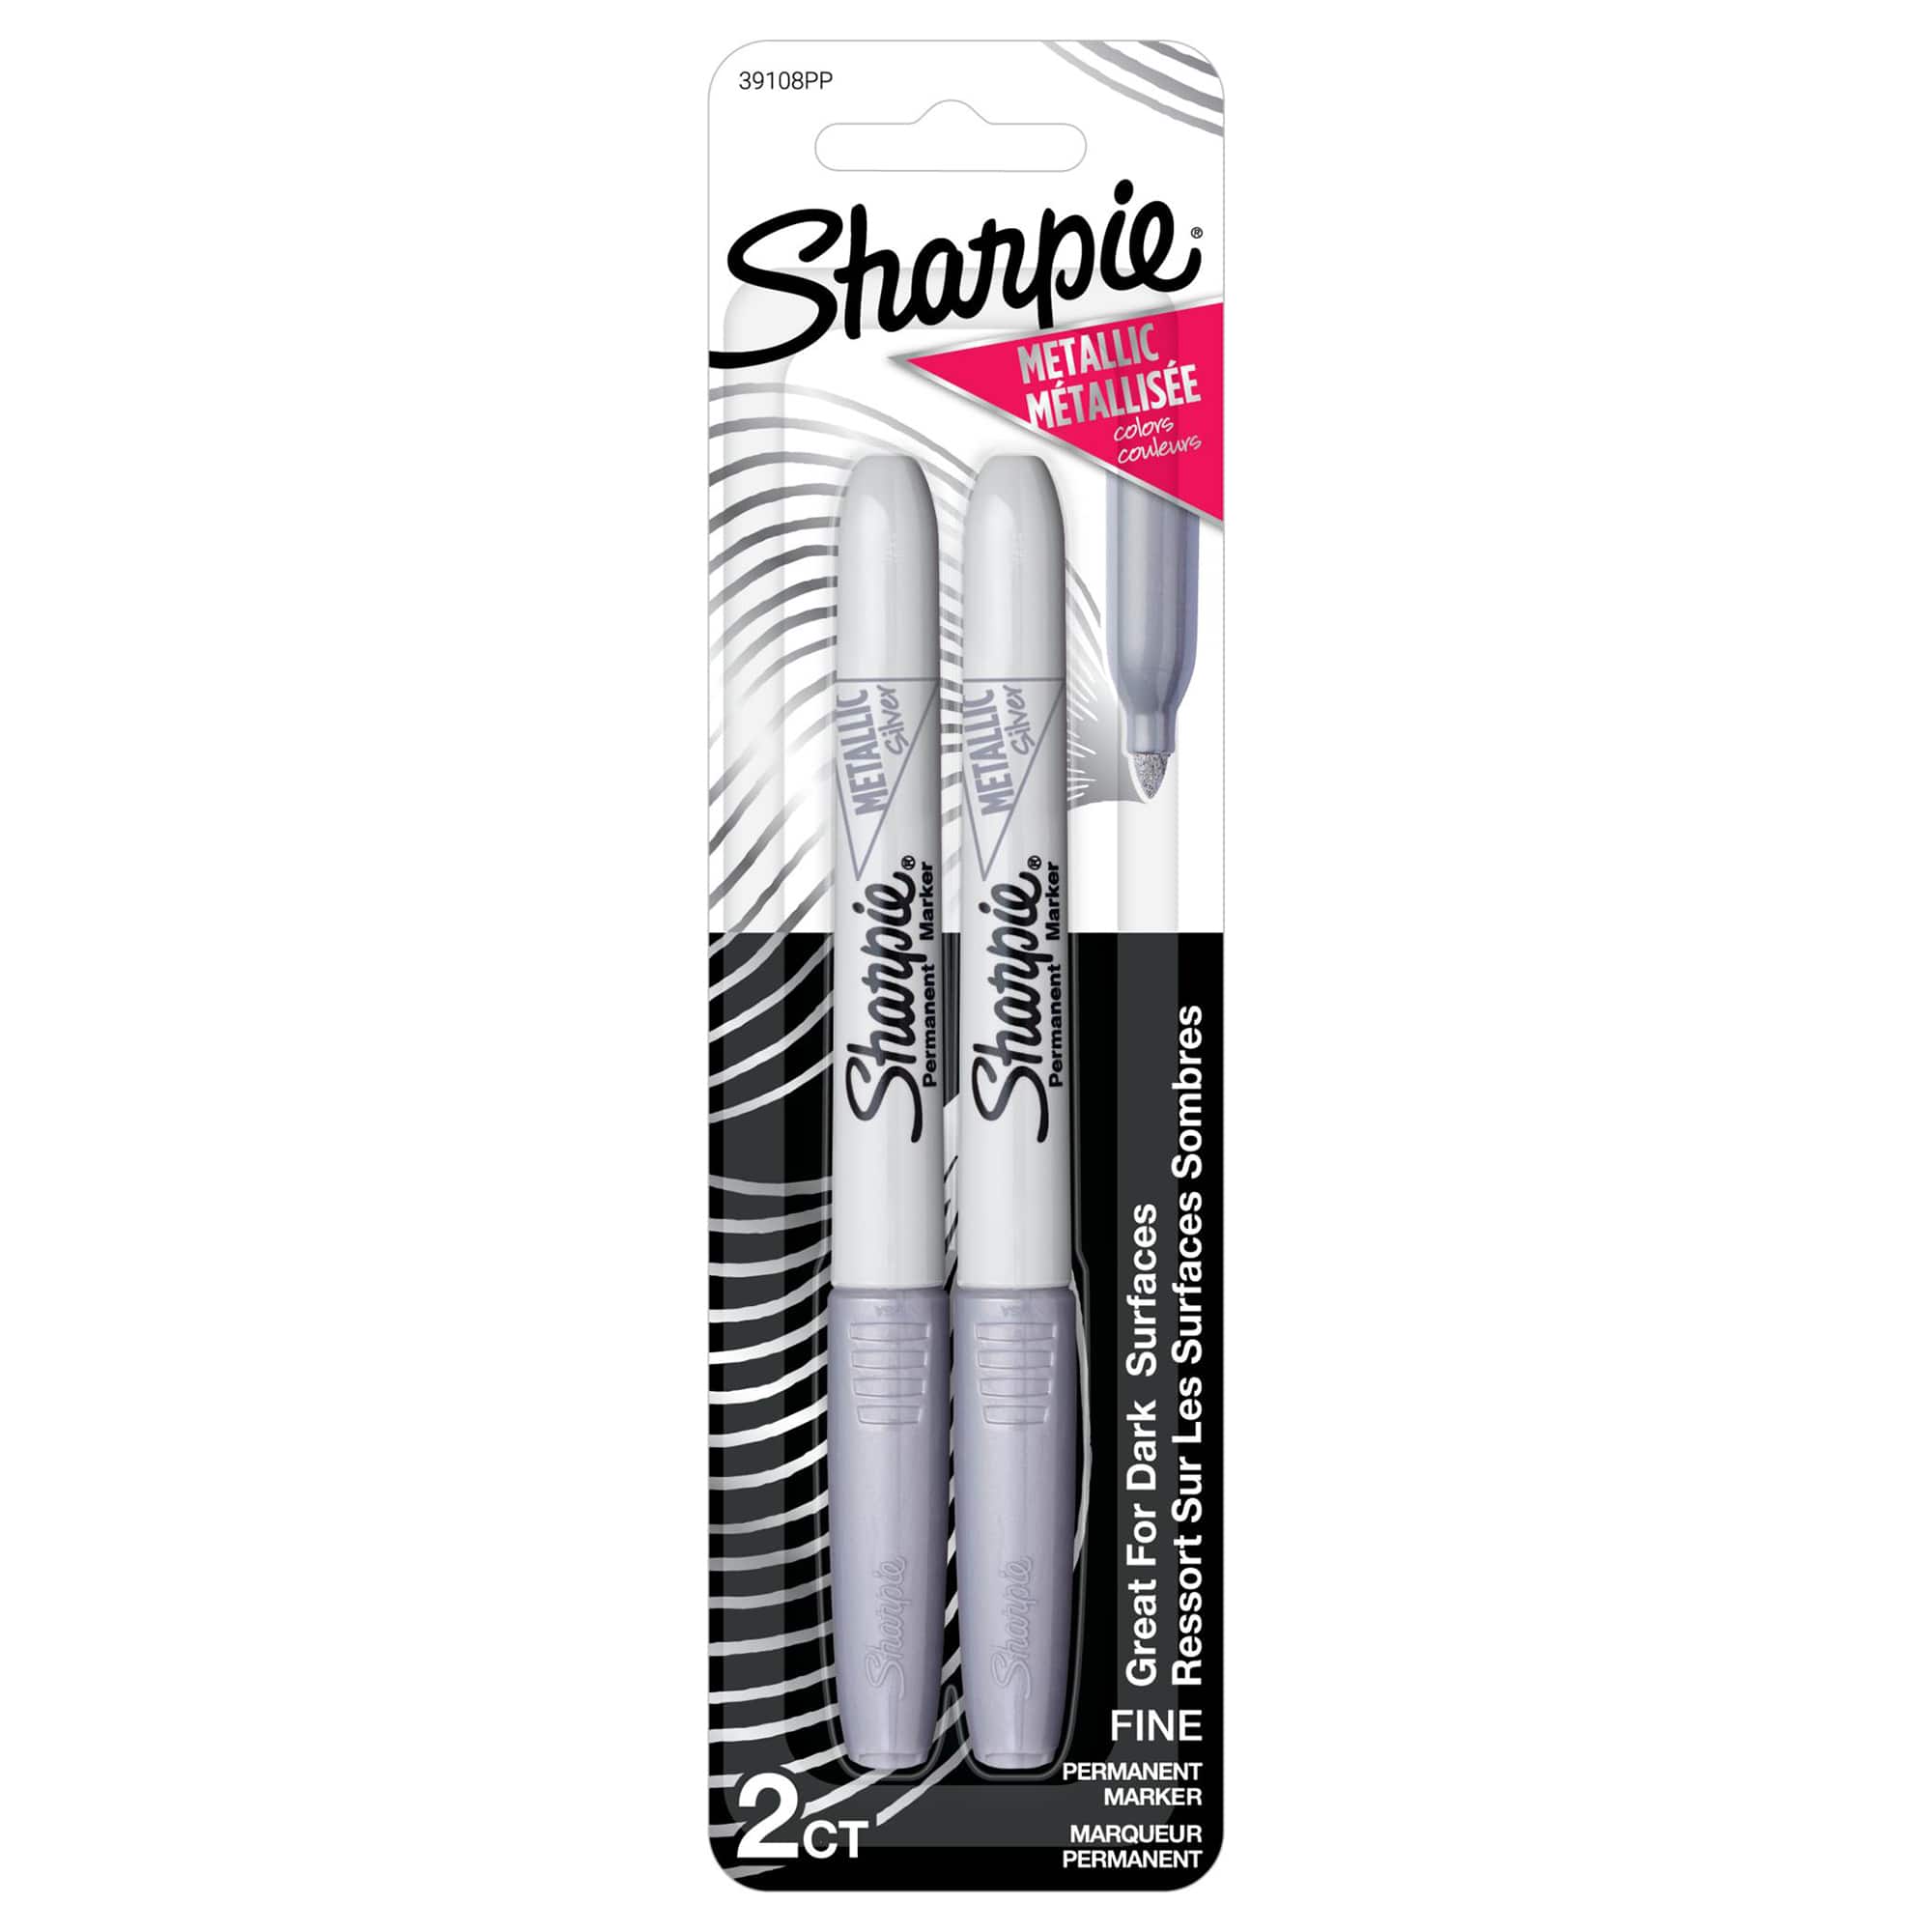 12 Pack for sale online Sharpie 39100 Permanent Fine Markers Metallic Silver 